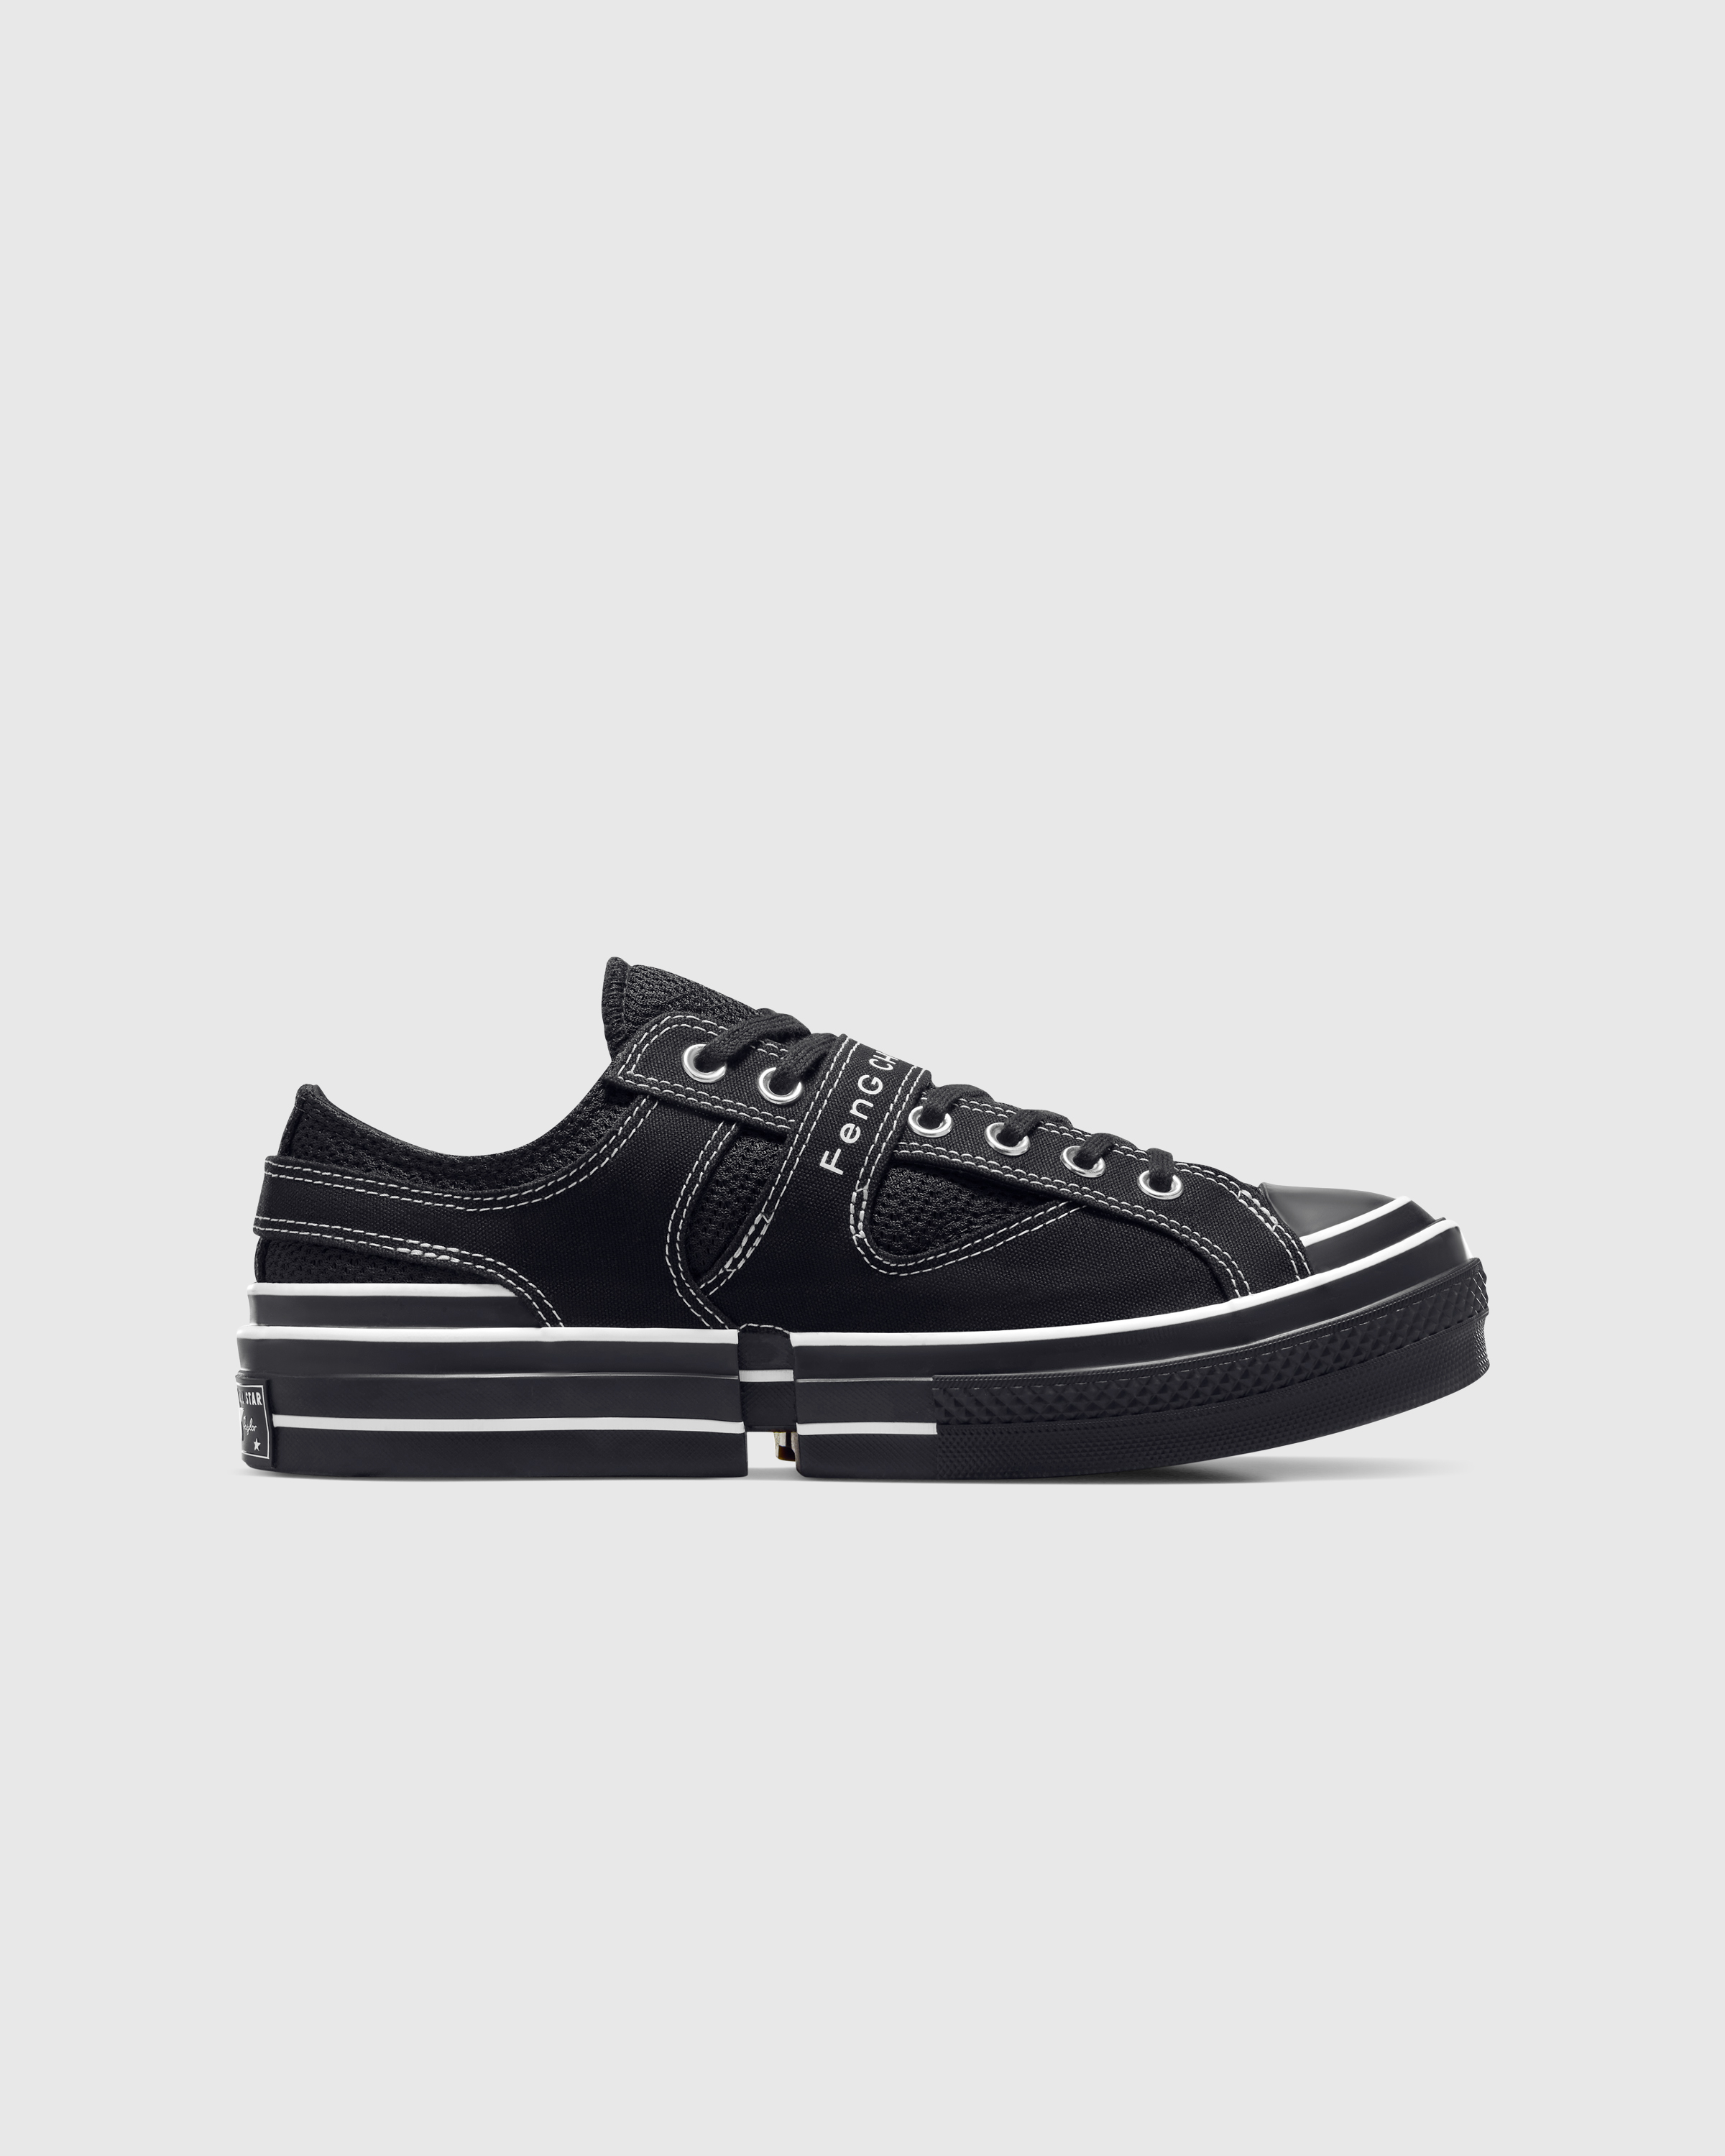 Feng Chen Wang x Converse – 2-in-1 Chuck 70 Black/Egret/Black - Low Top Sneakers - Black - Image 1